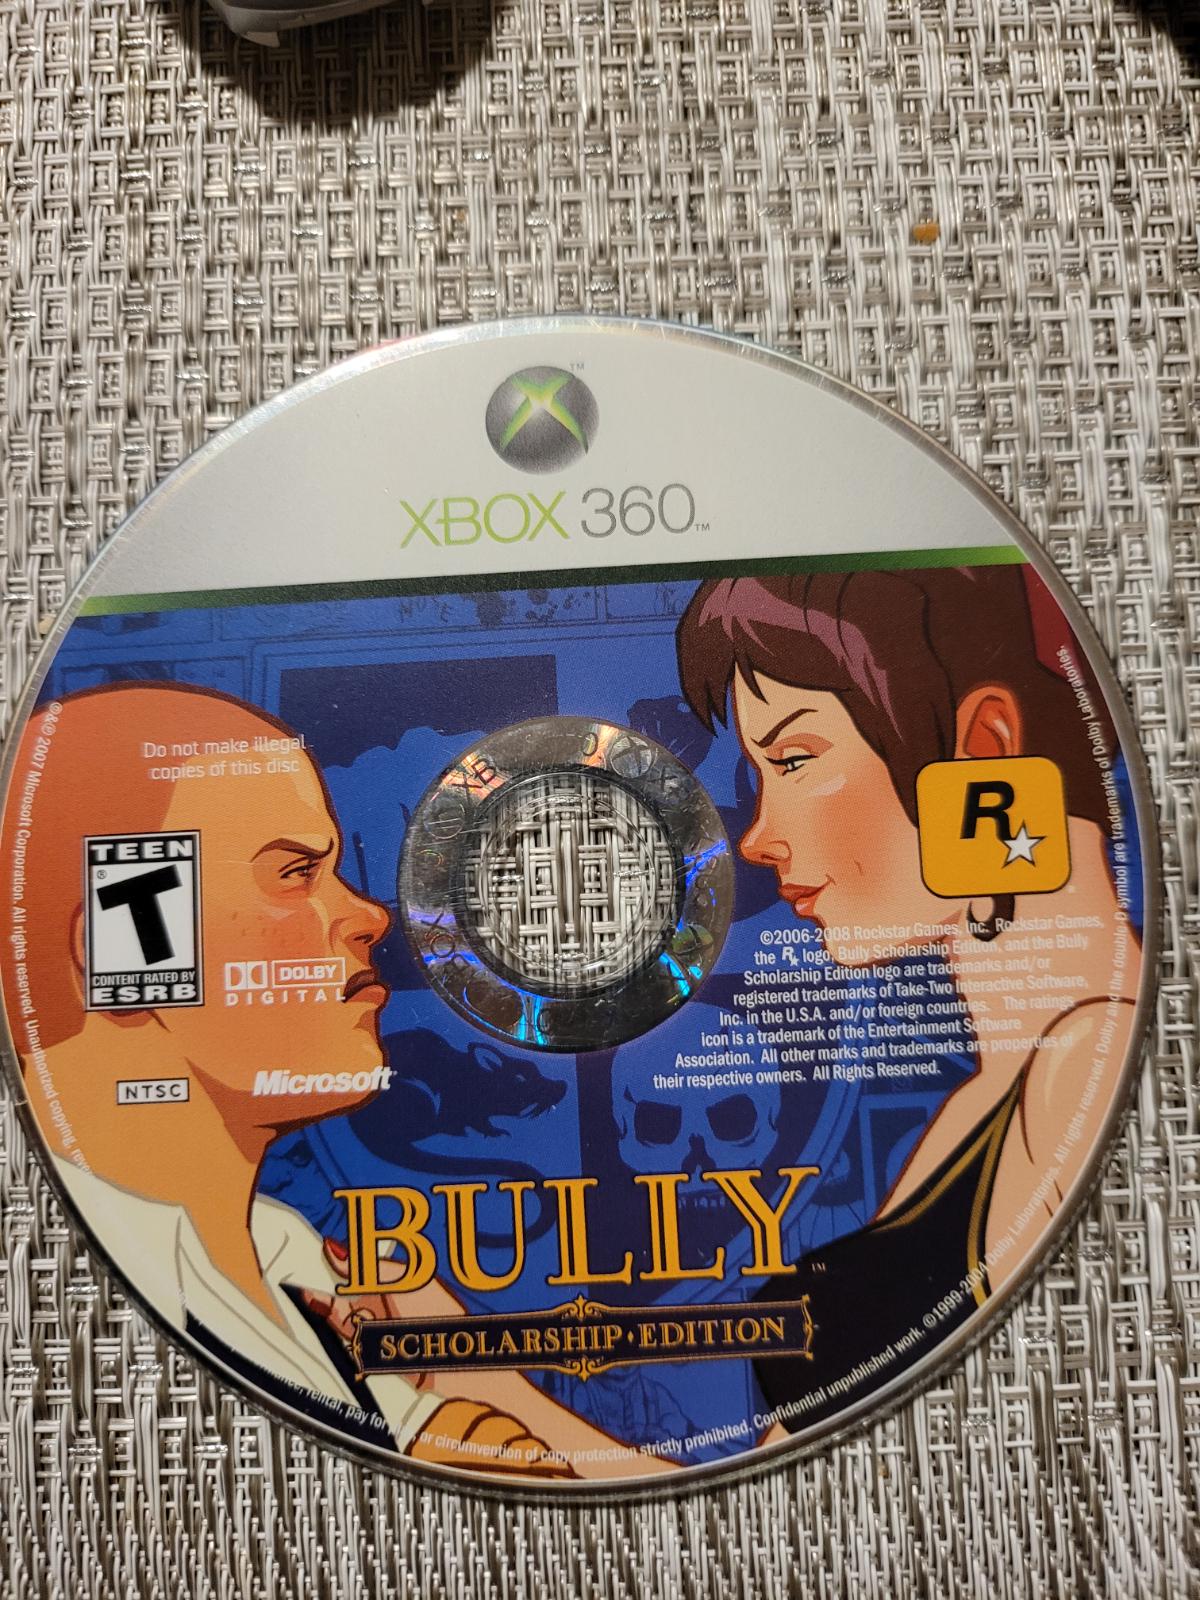 Bully - Scholarship Edition - Xbox One / Xbox 360 Brand New And SEALED